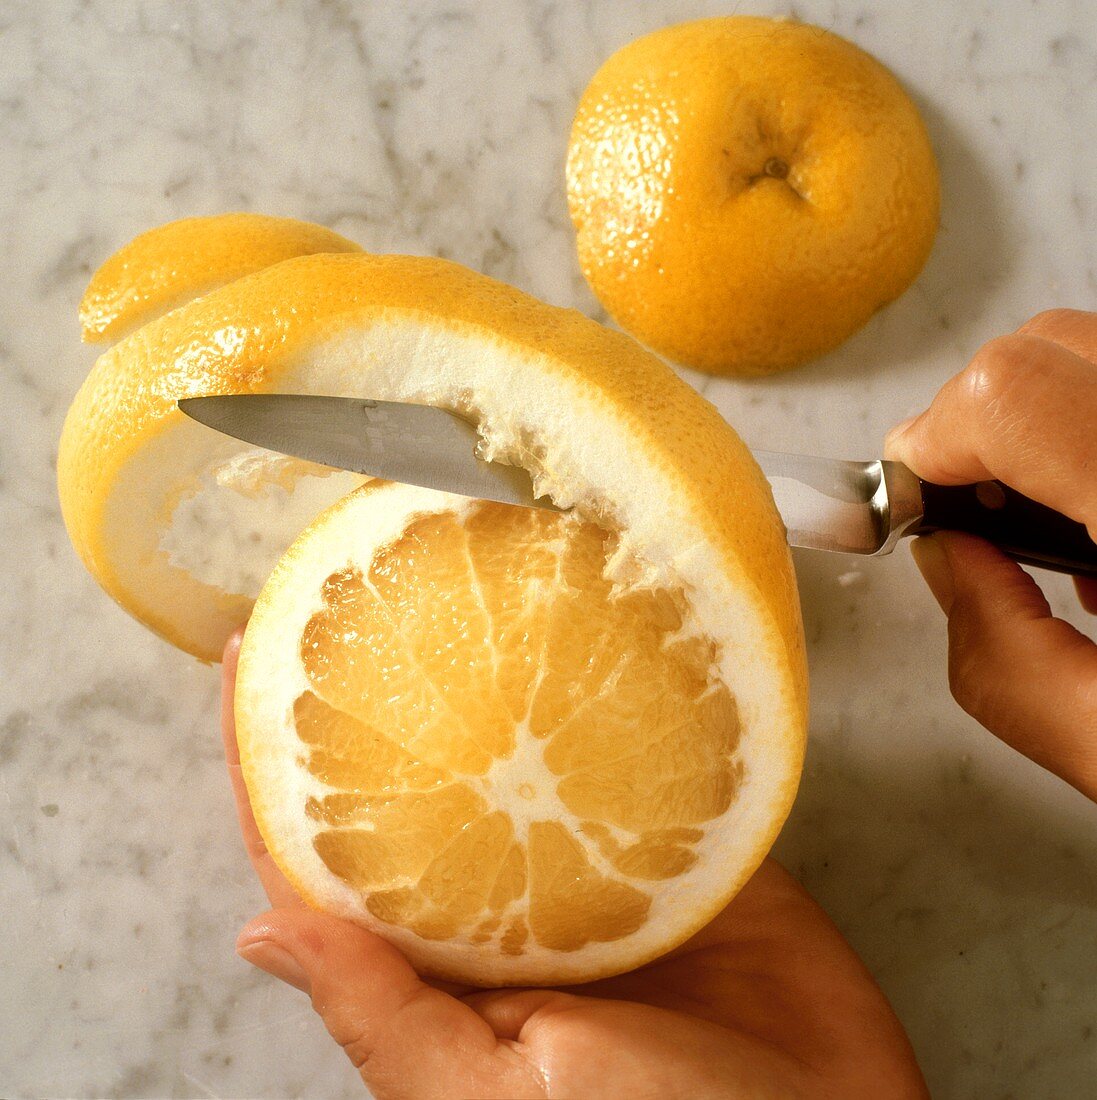 Peeling grapefruits with a knife